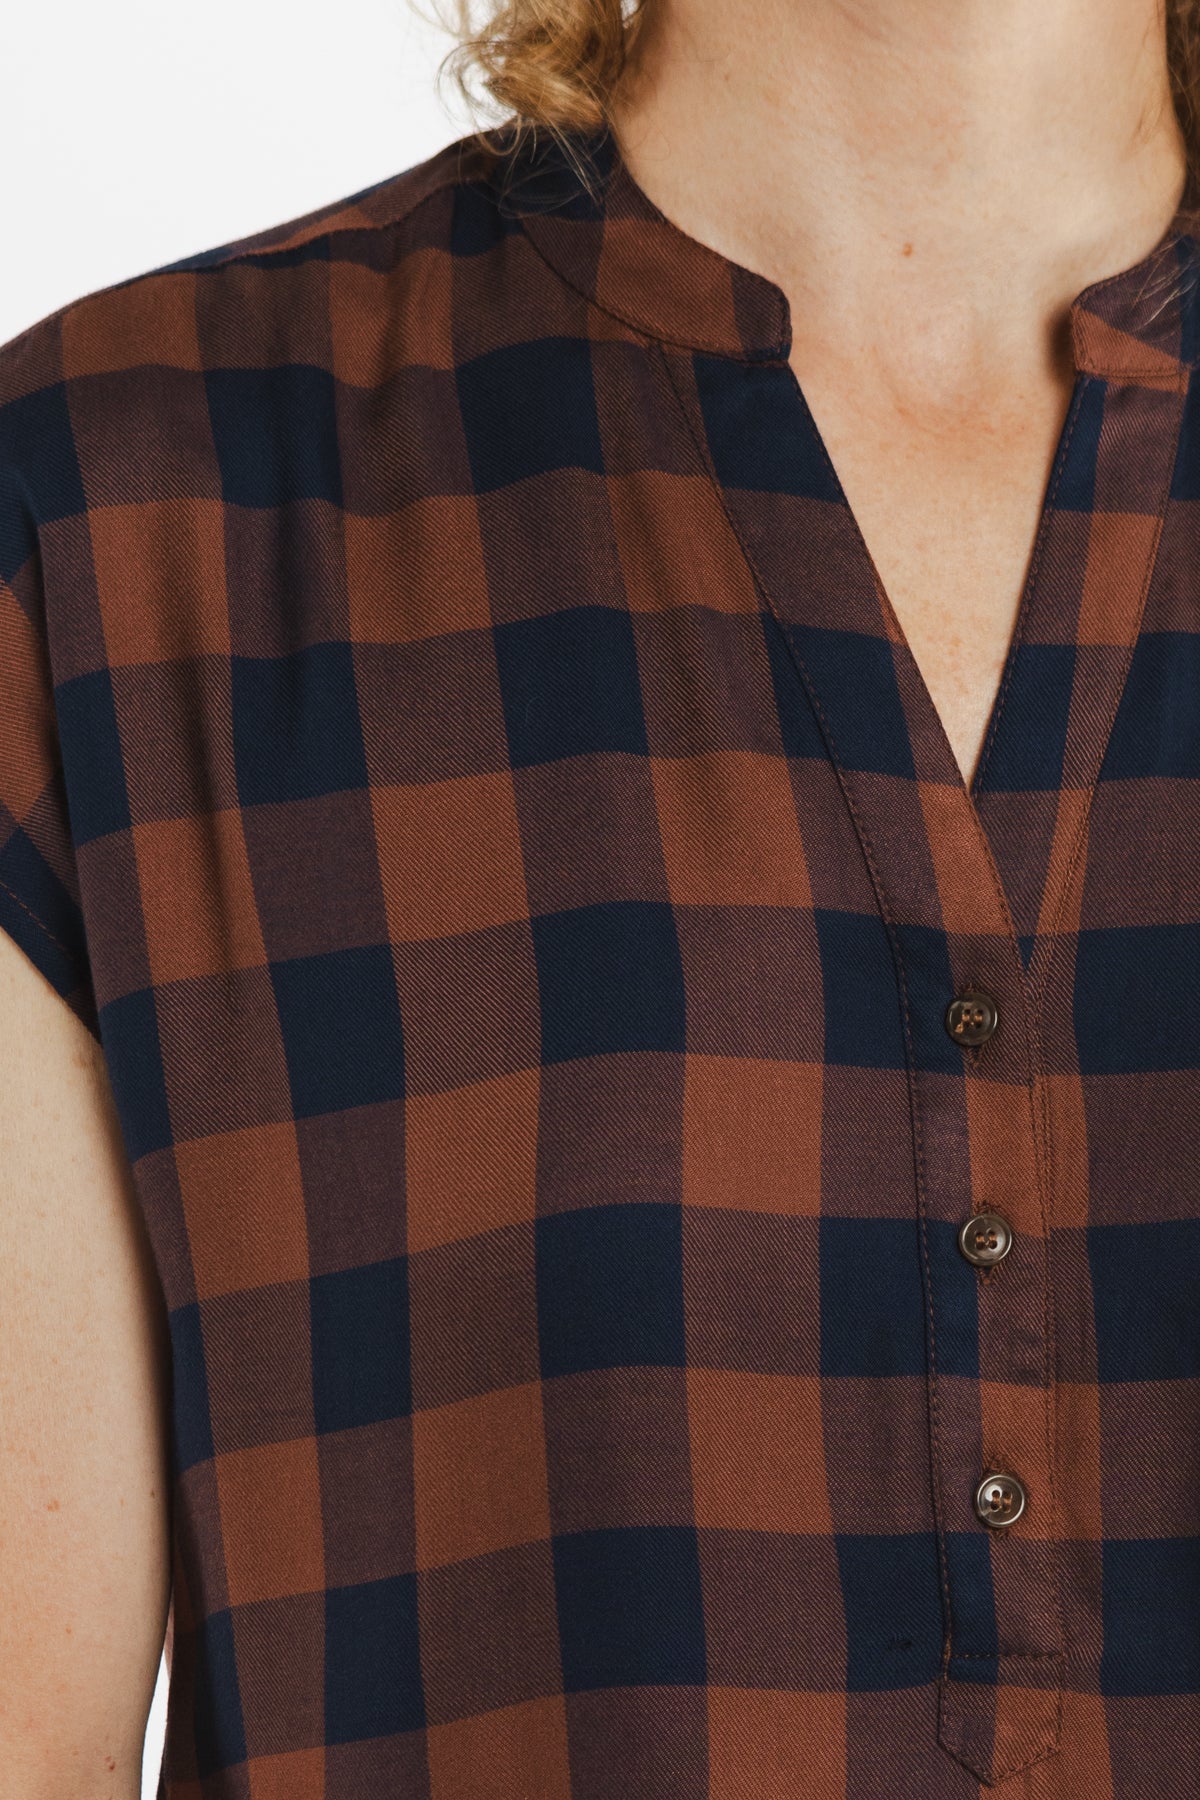 Ladd Blouse / Navy-Rust Gingham